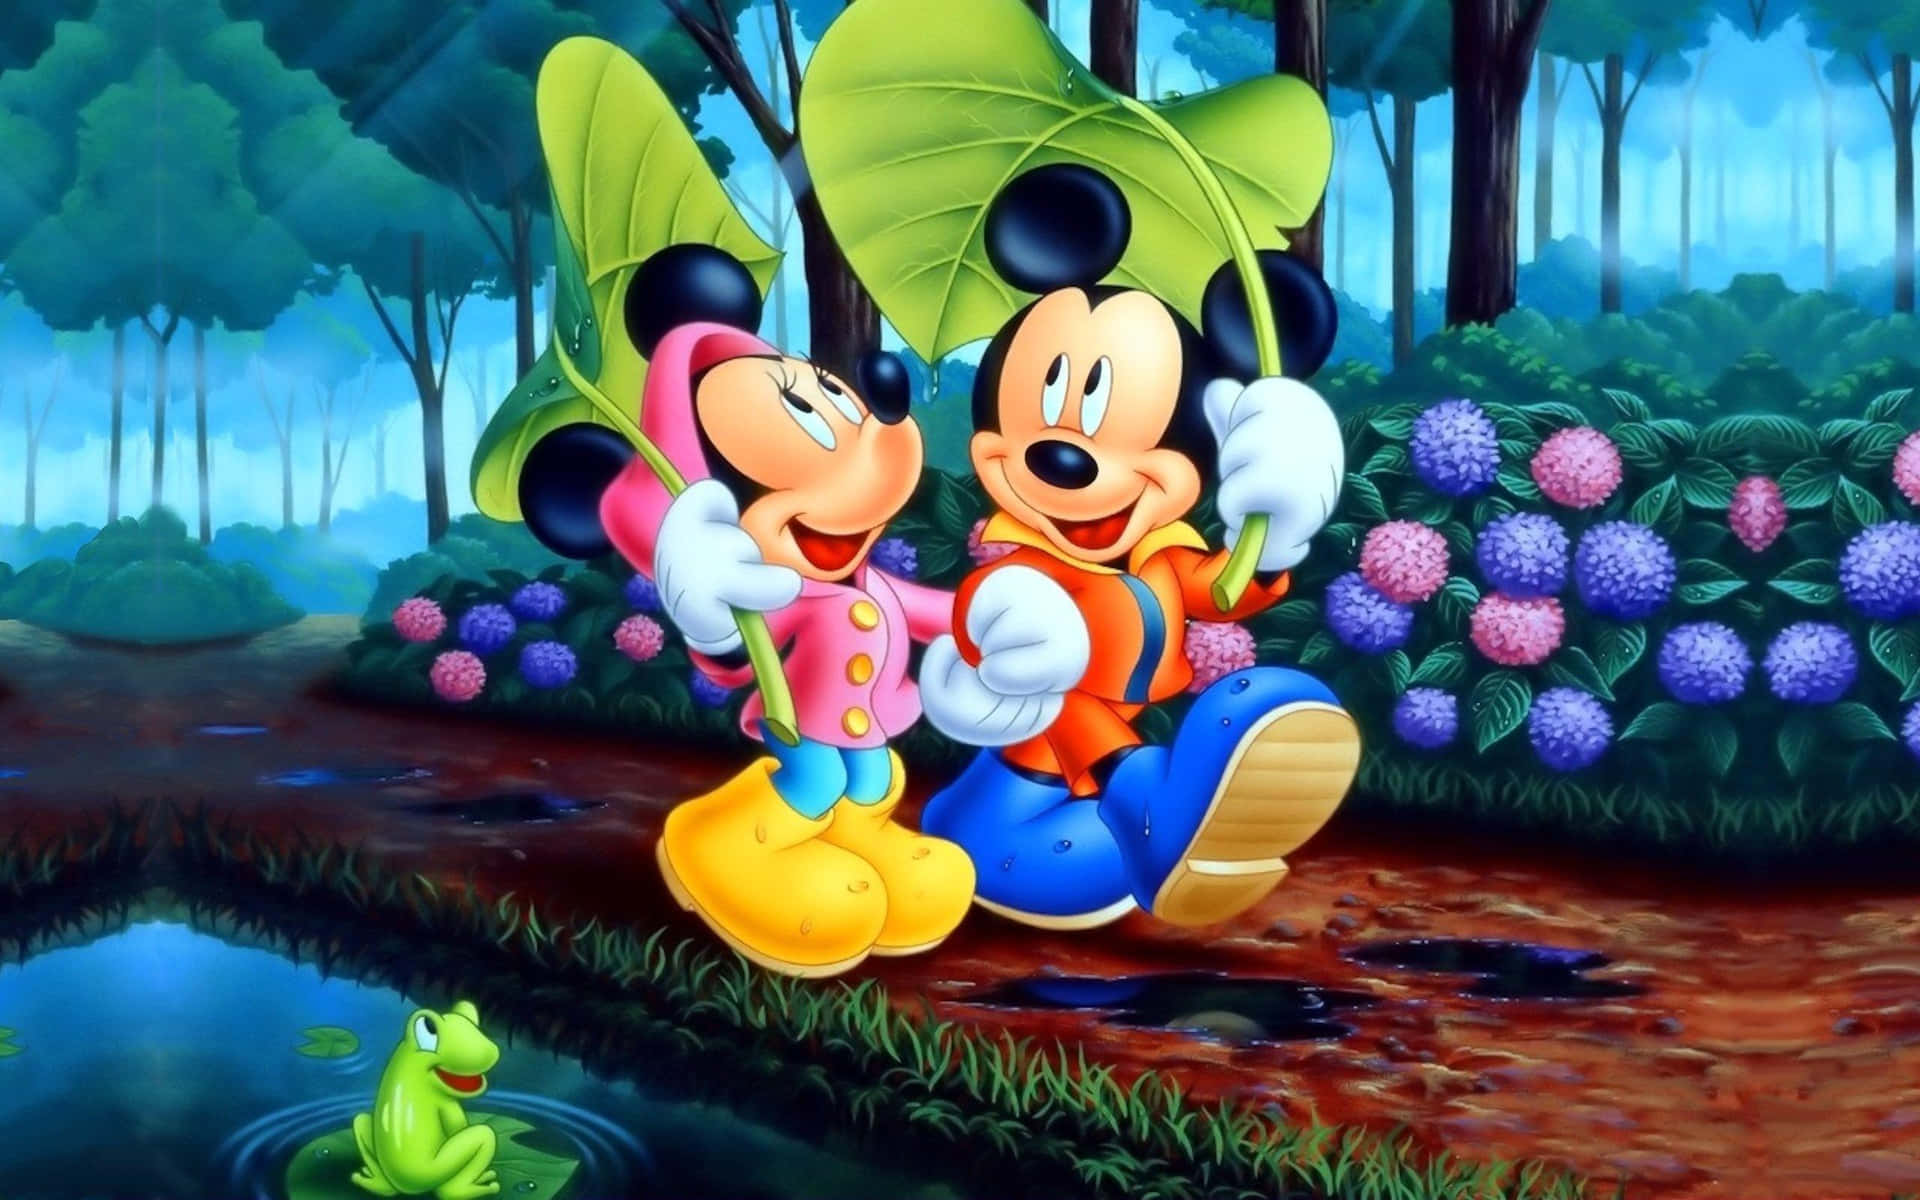 Mickey Mouse And Minnie Mouse In The Forest